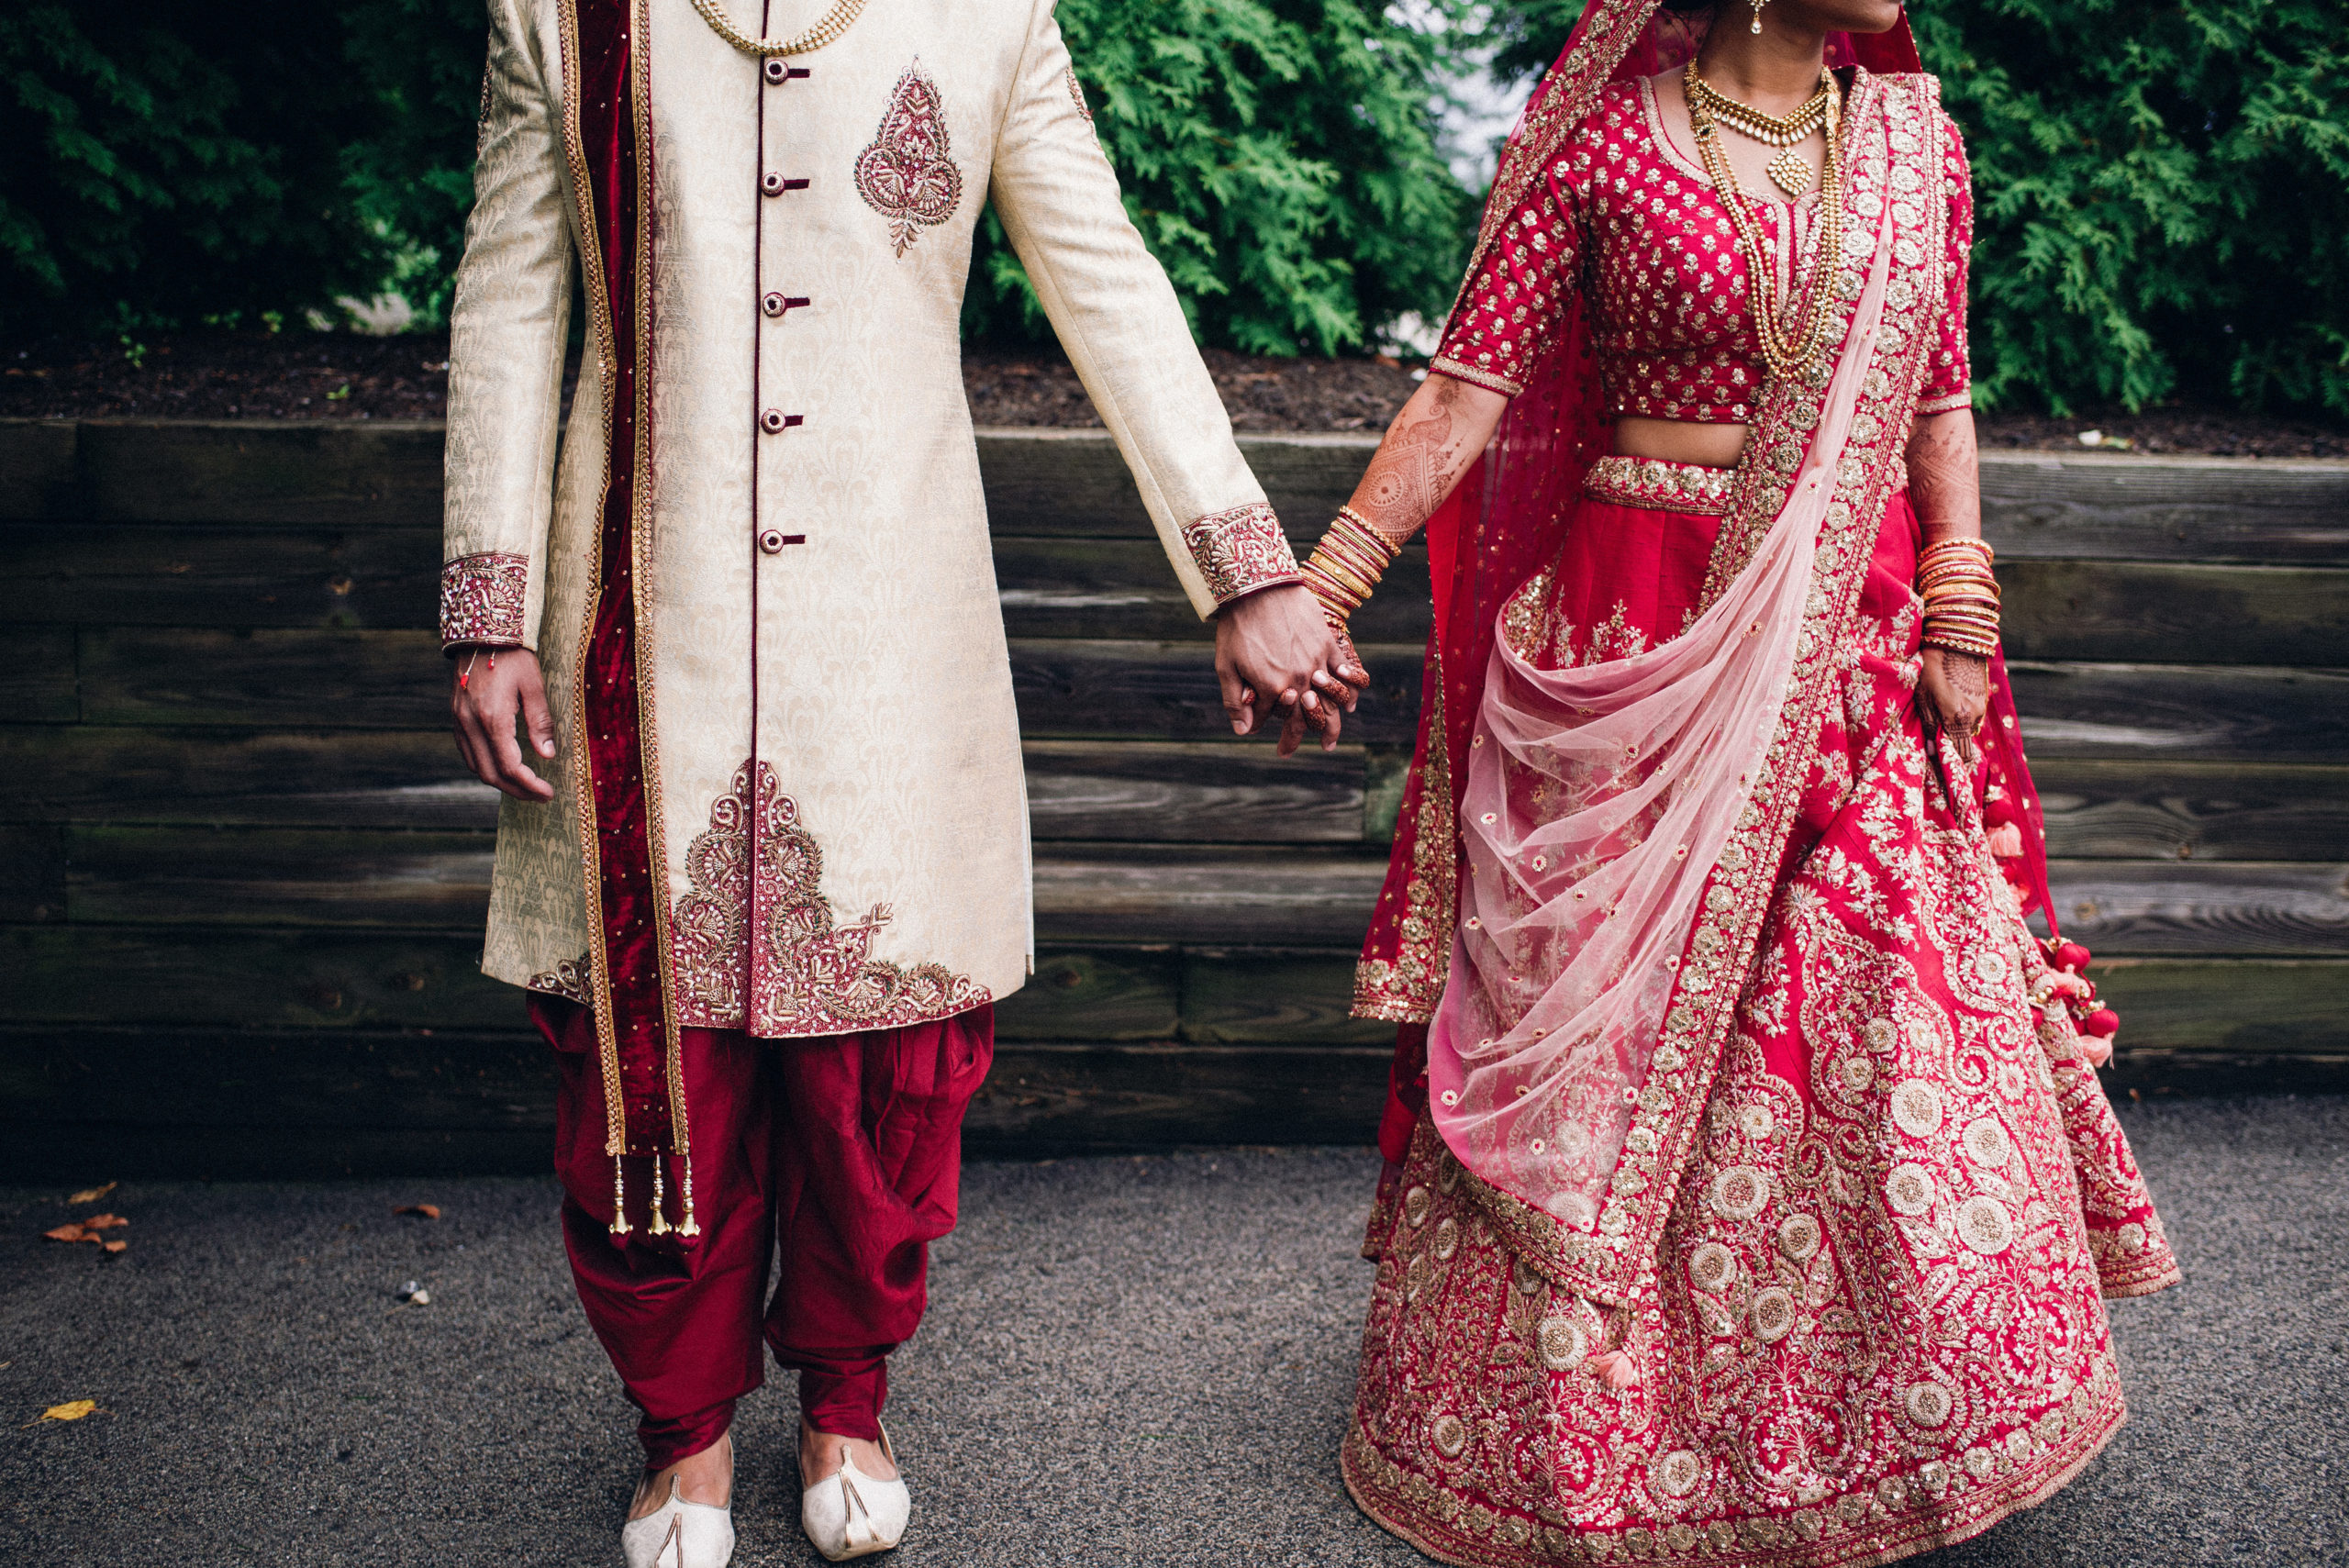 Best Matrimony to Find Indian Partner